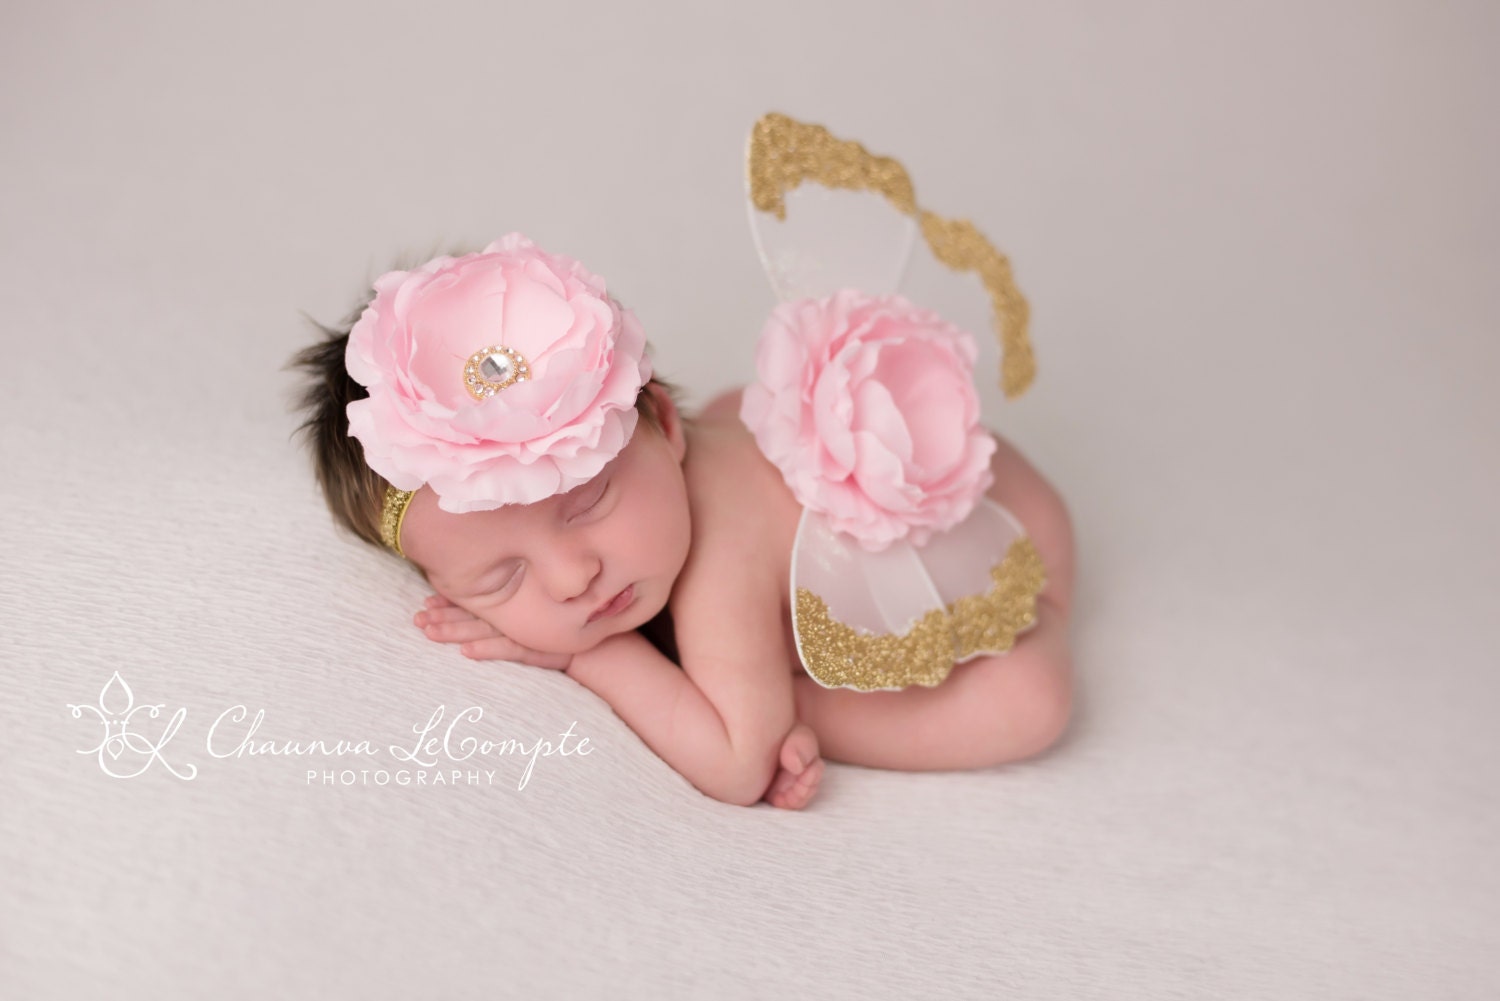 Gold, White and Pink Butterfly Wing Set, Newborn Wings, Newborn Wing Prop, Baby Wing Prop, Newborn Photo Prop, Newborn Butterfly Wings